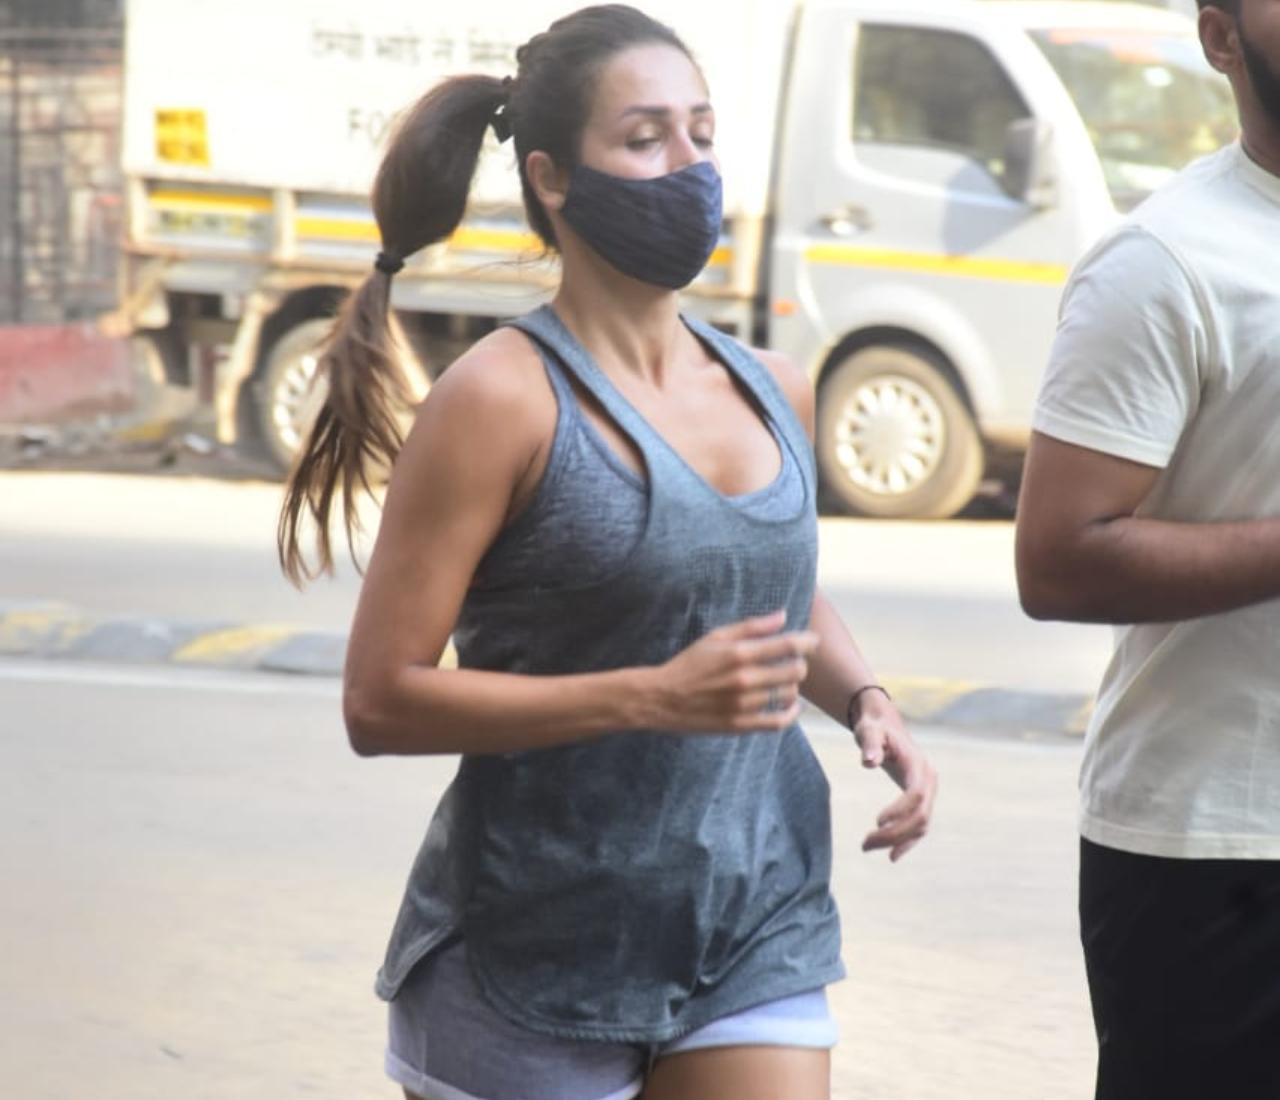 Malaika looked chic in her grey sports bra, crop top and shorts. She wore a blue mask to prevent the spread of COVID-19. She tied her hair in bun.